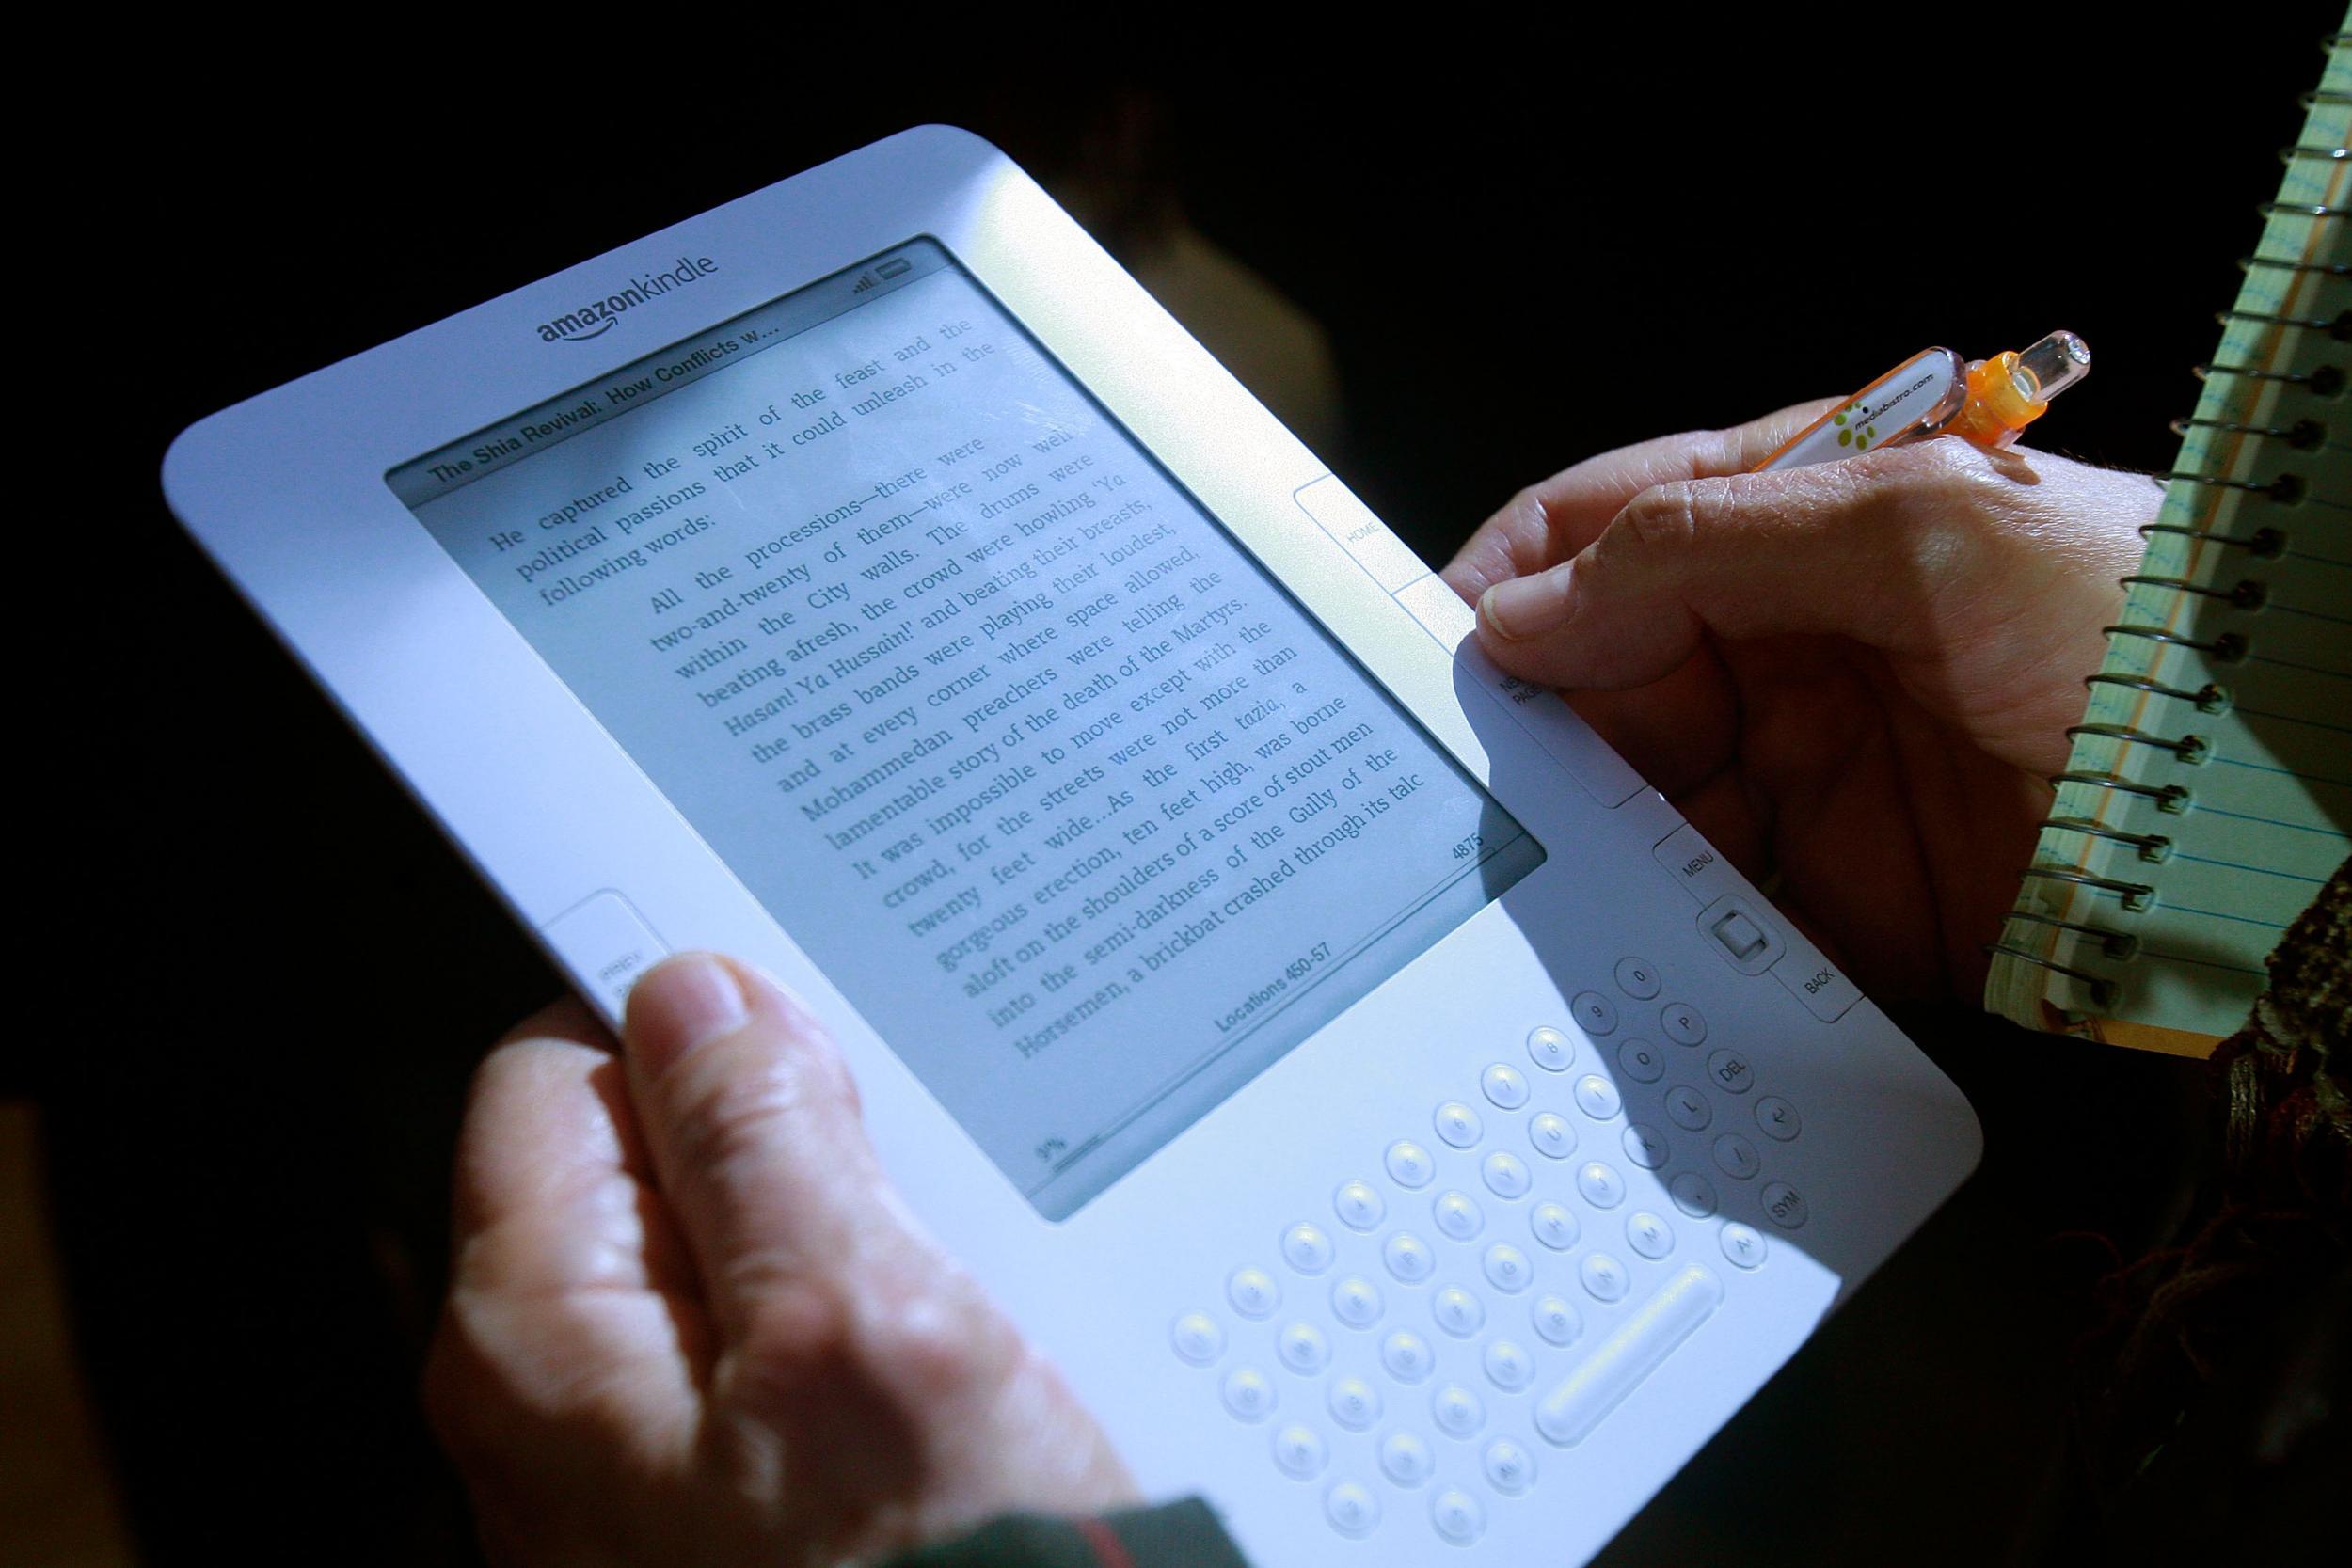 The urgent update only applies to older Kindles